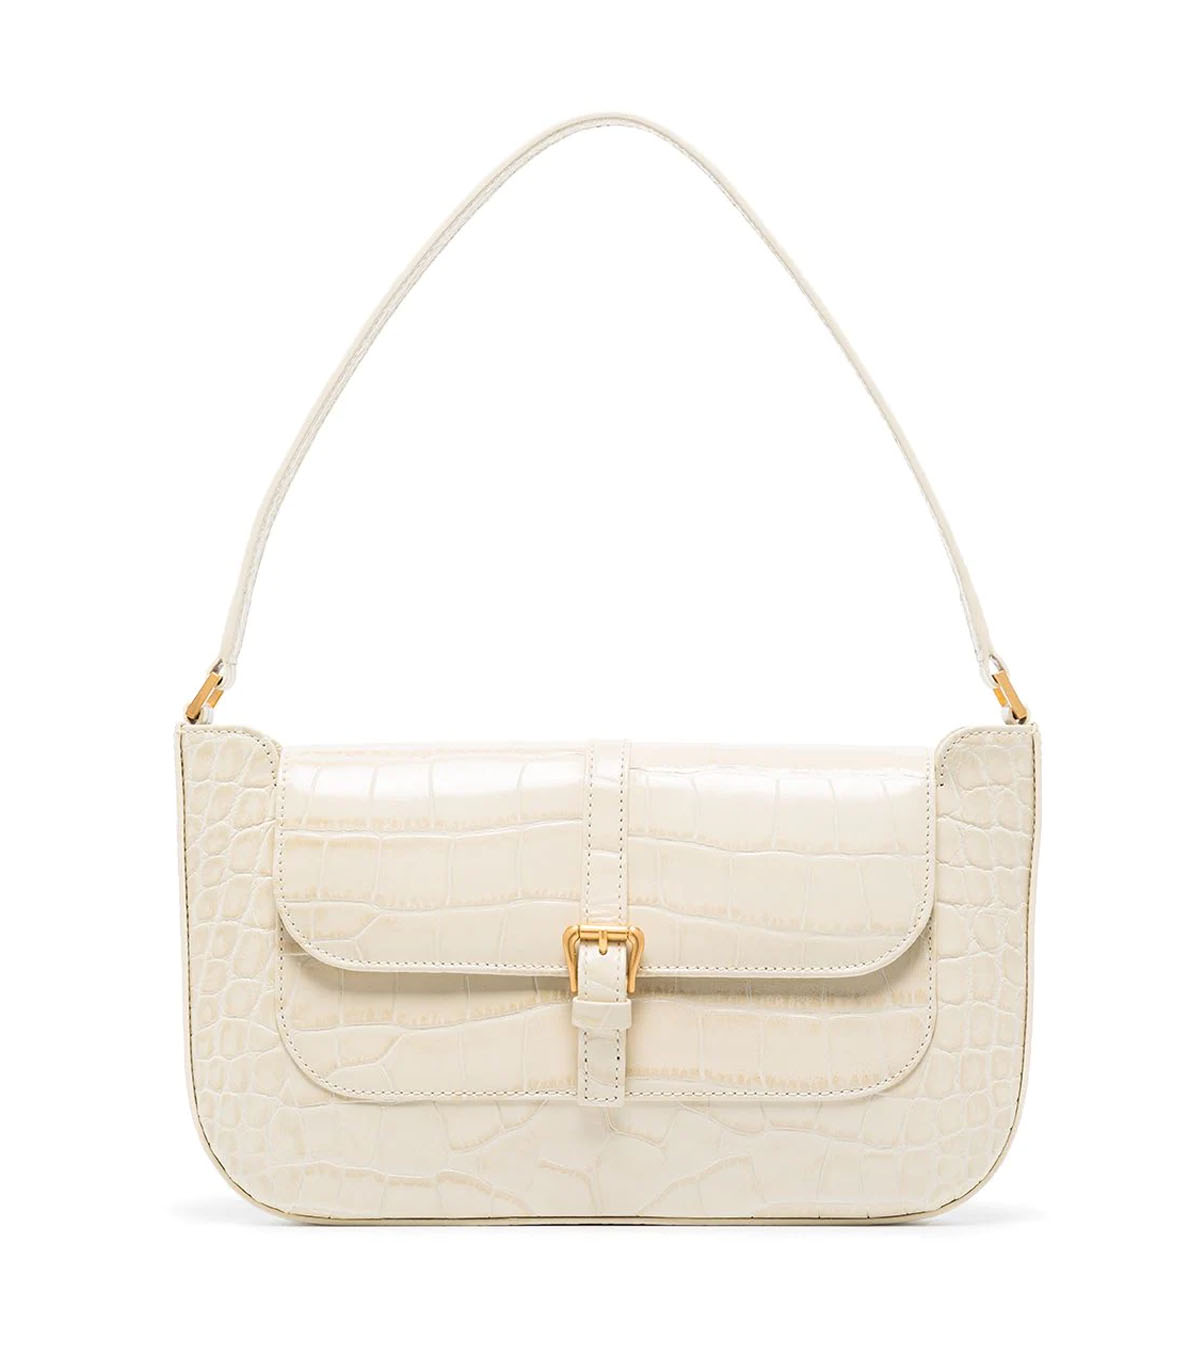 Discover Top Styles & Chic Designer Bags Under 3500$